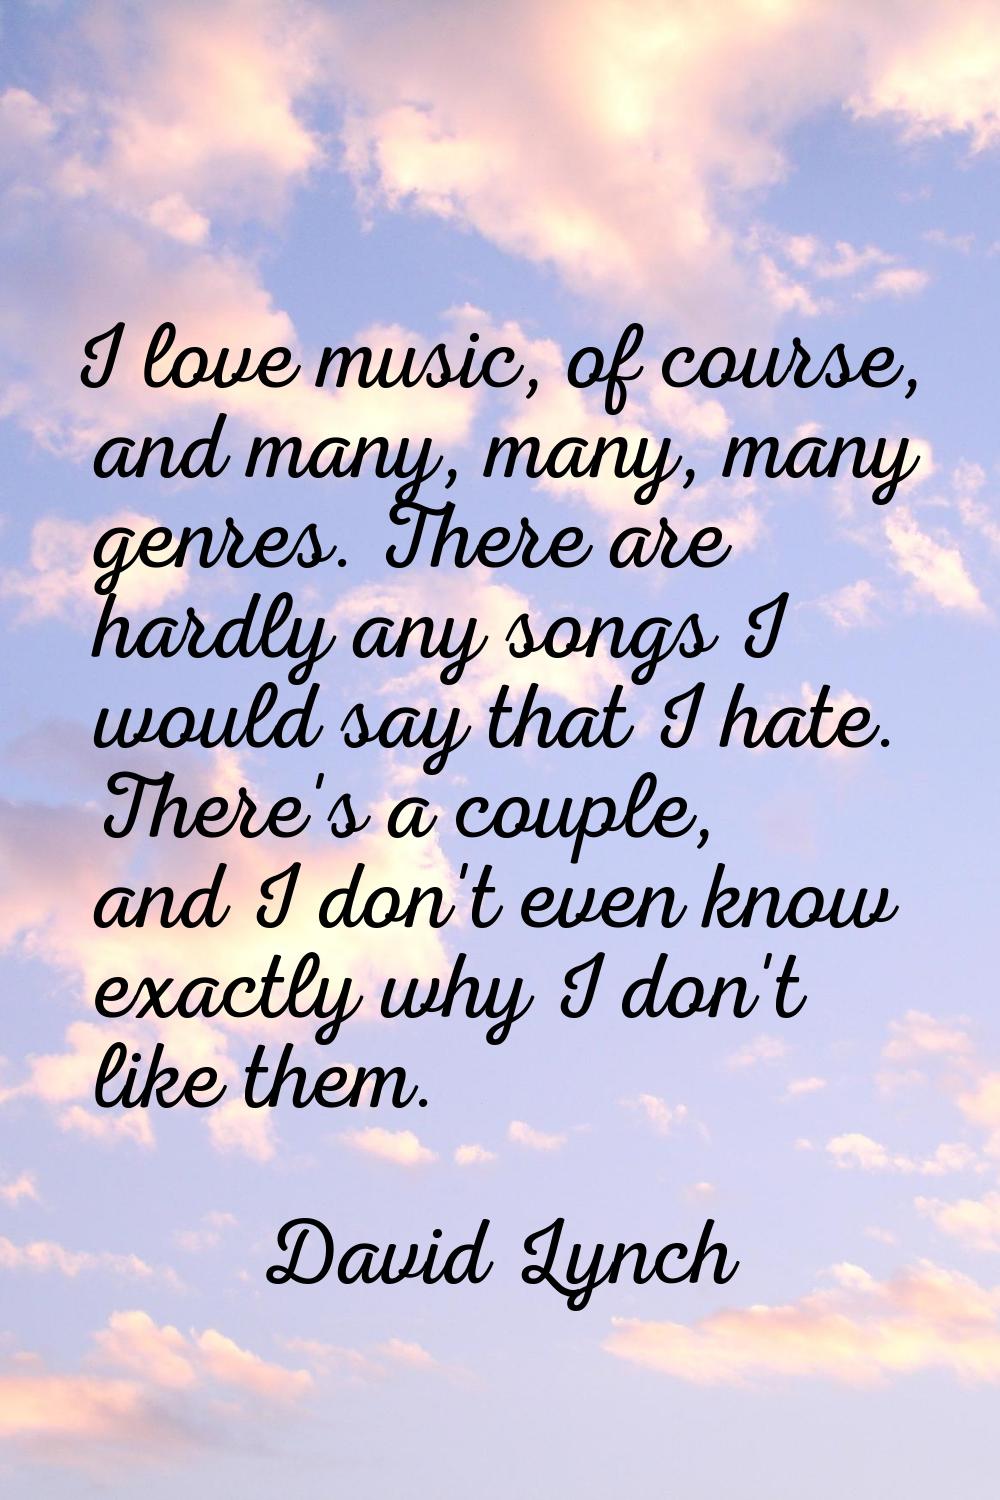 I love music, of course, and many, many, many genres. There are hardly any songs I would say that I